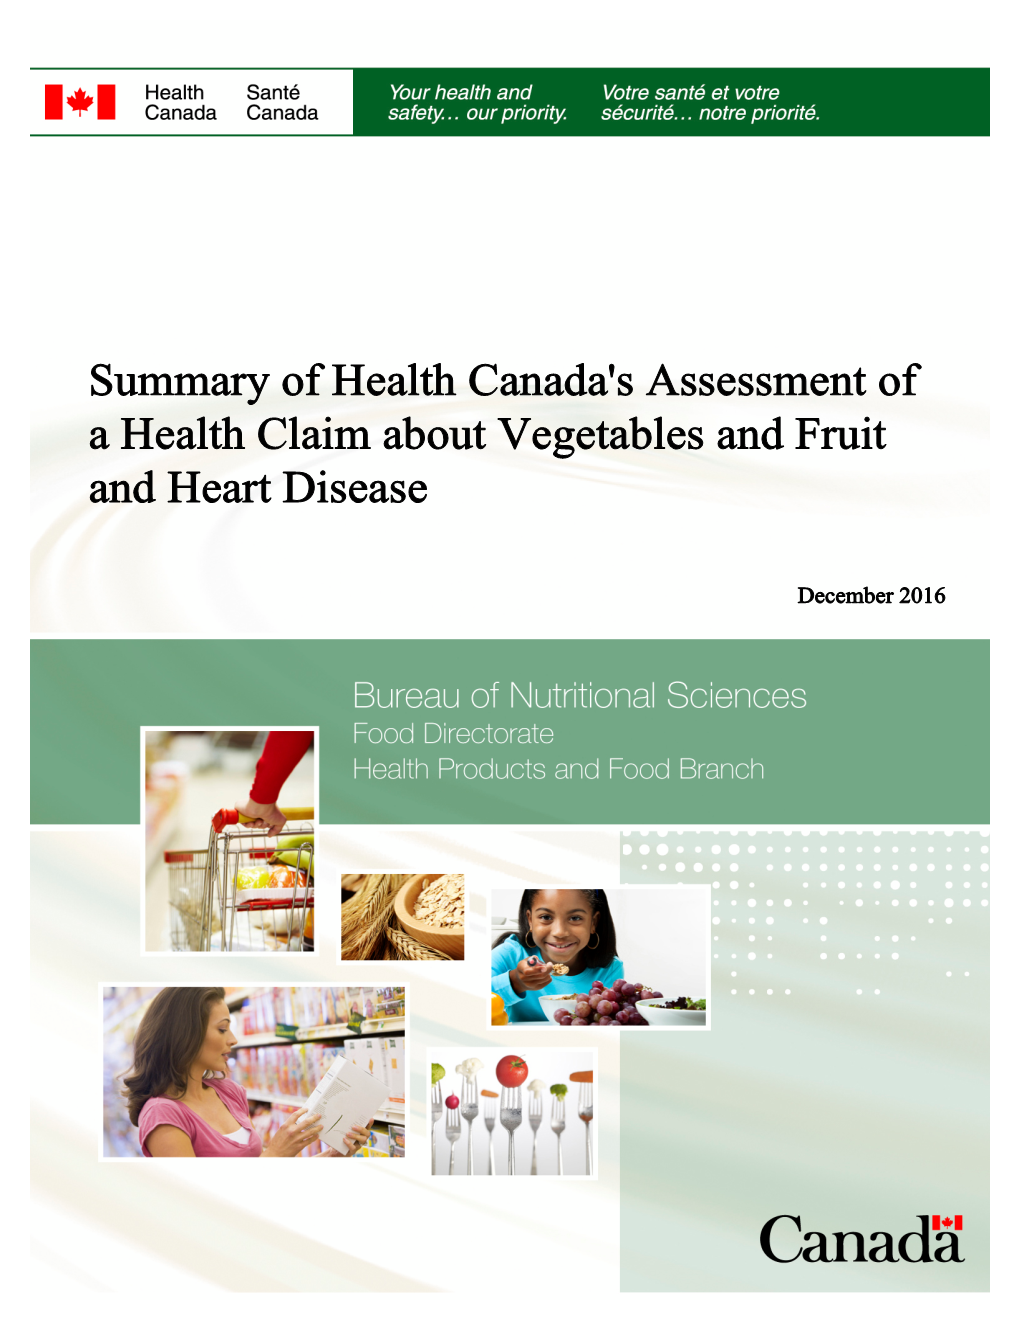 Health Claim About Vegetables and Fruit and Heart Disease